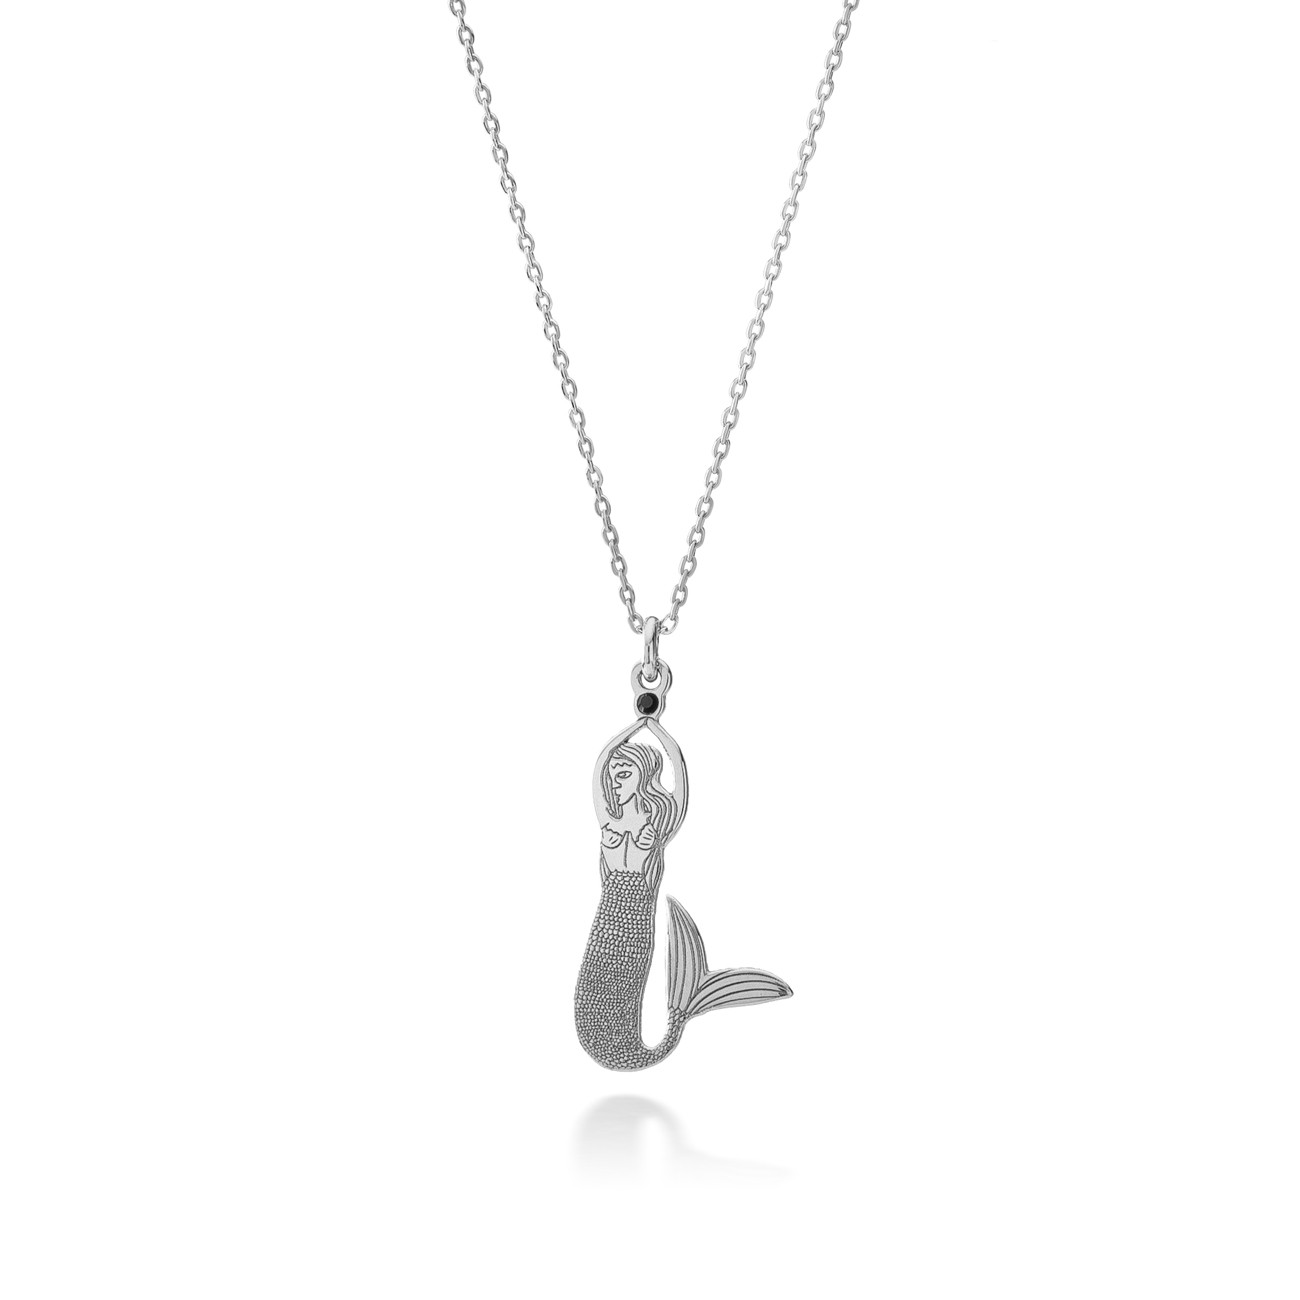 Silver mermaid necklace with crystal, AUGUSTYNKA x GIORRE